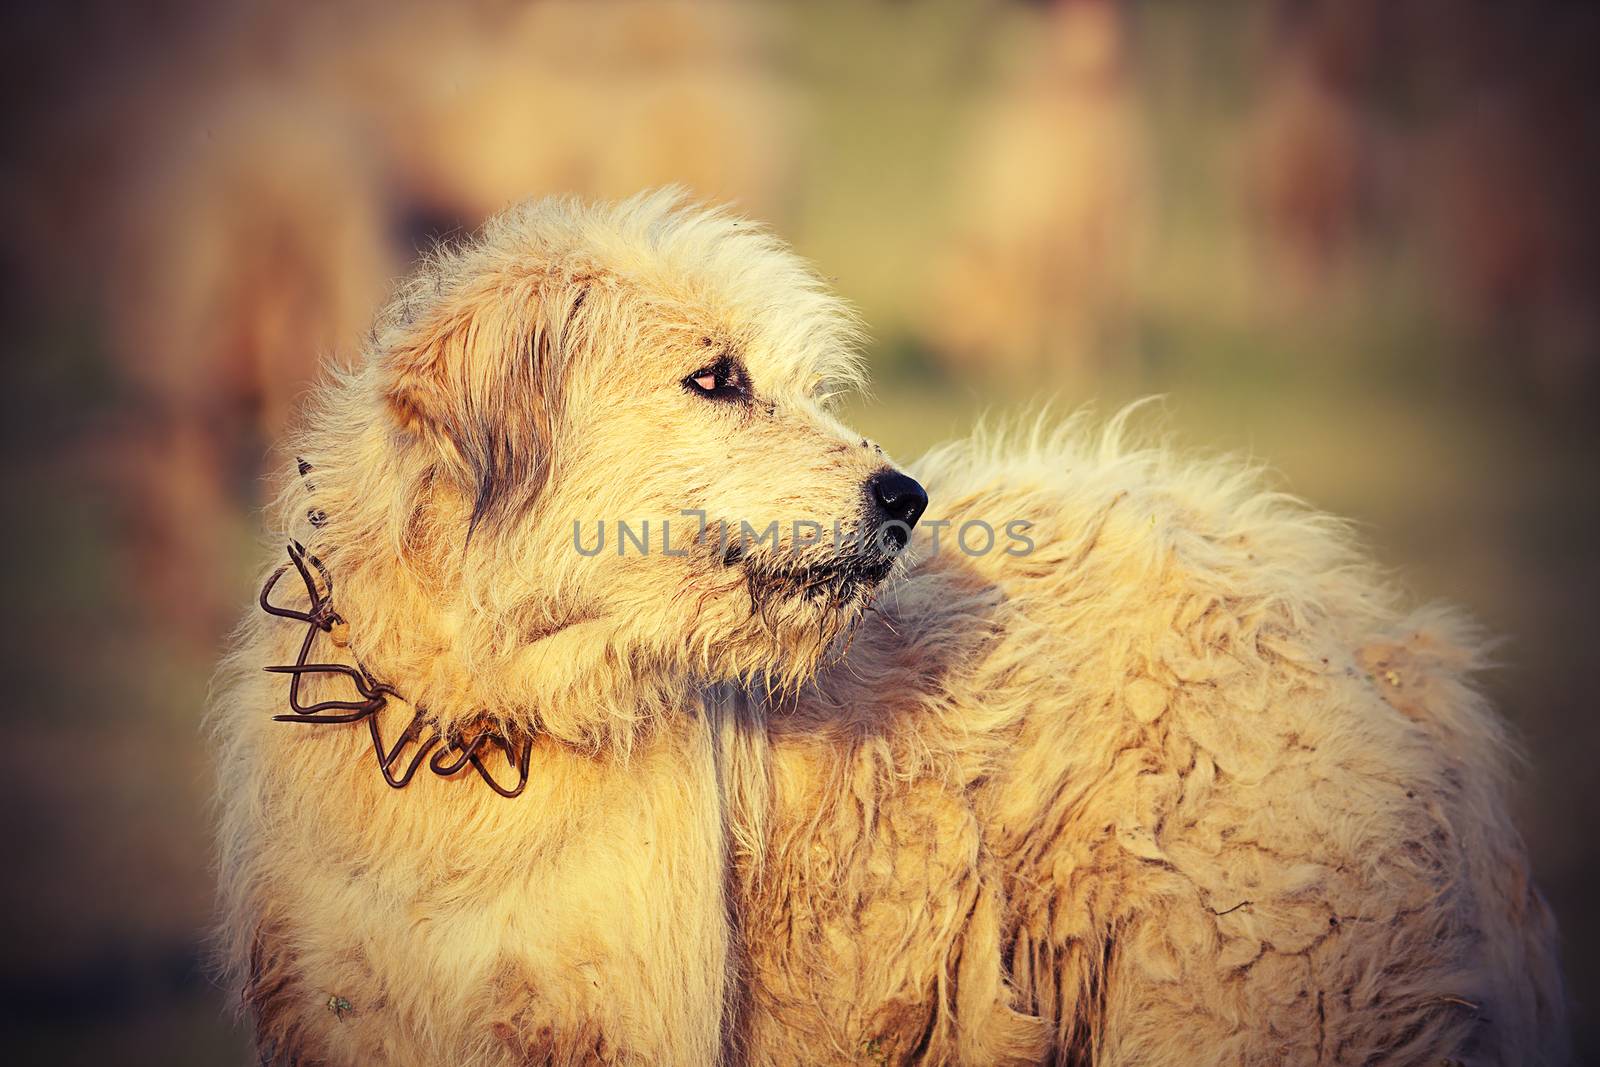 white romanian sheep hound close up, image taken near the traditional farm; these dogs fight with bears and wolves to protect the herd